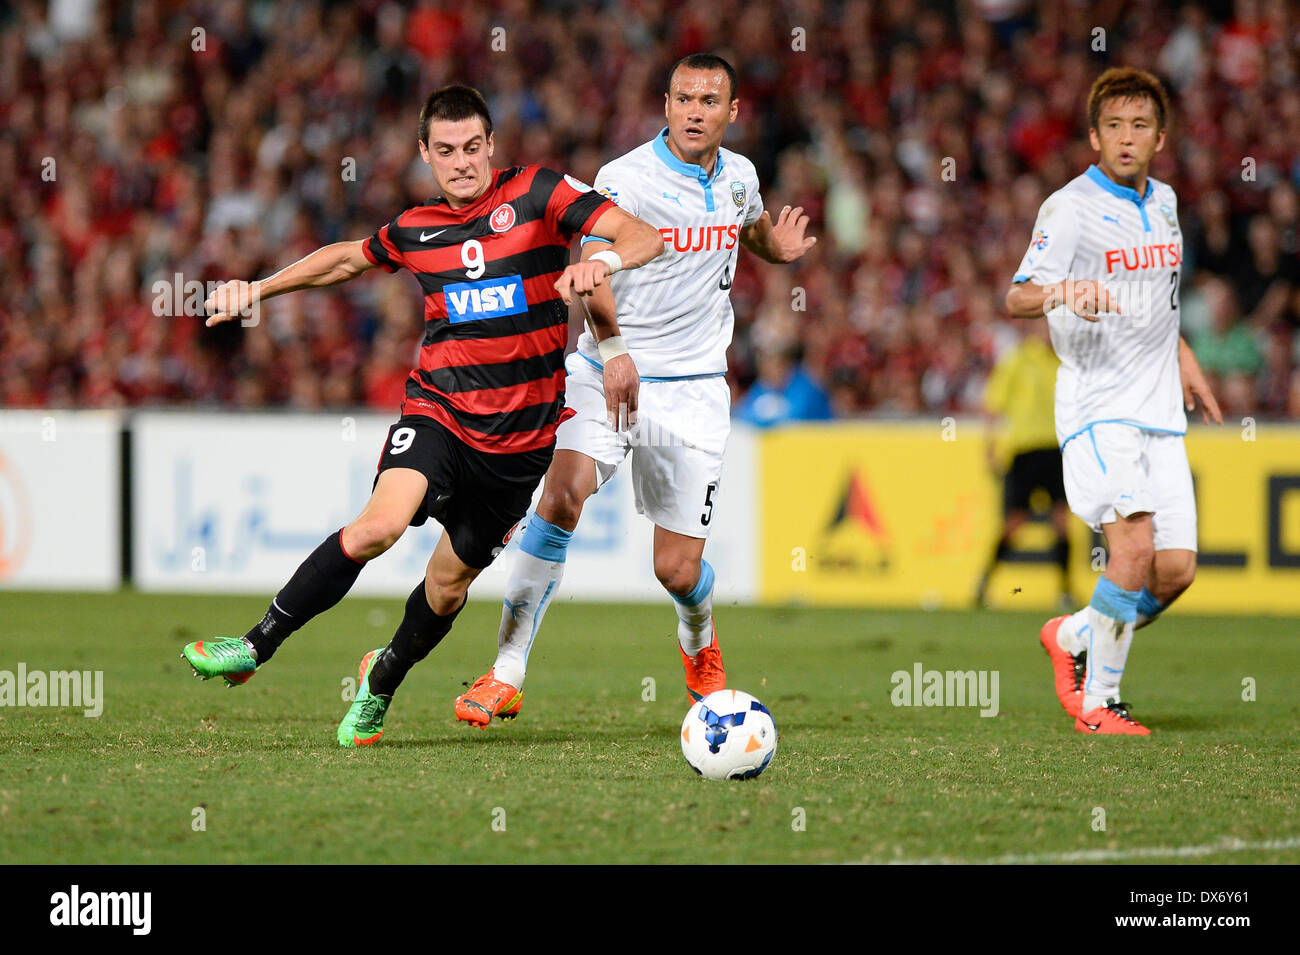 Sydney, Australia. 19th Mar, 2014. Wanderers forward Tomi Juric and Kawasaki defender Jeci in action during the AFC Champions League game between Western Sydney Wanderers FC and Kawasaki Frontale FC of Japan from the Pirtek Stadium, Parramatta. Wanderers won 1-0. Credit:  Action Plus Sports/Alamy Live News Stock Photo